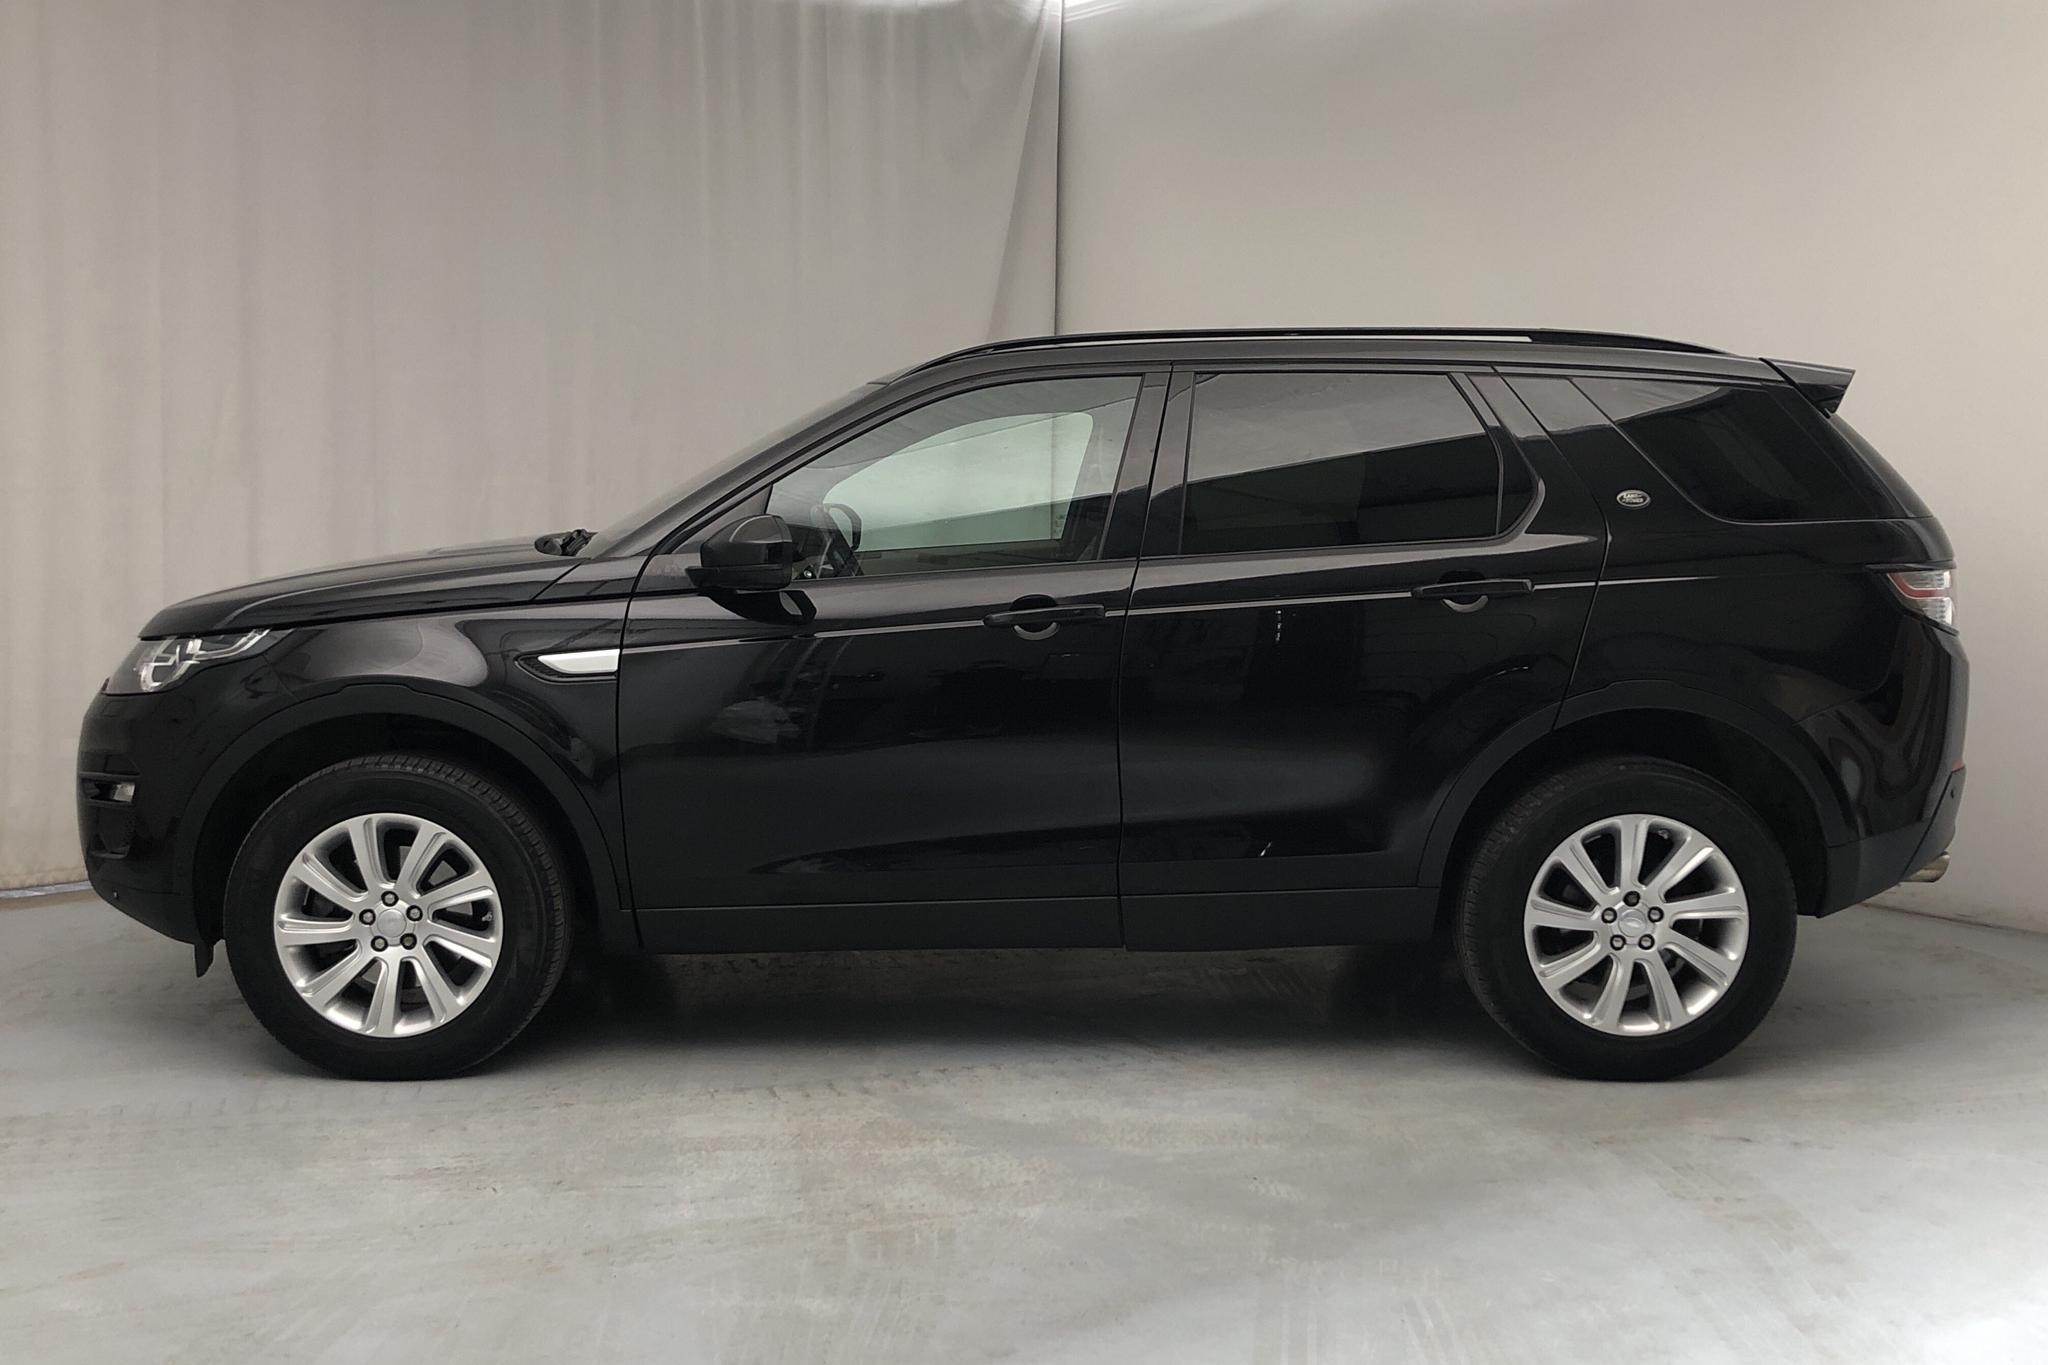 Land Rover Discovery Sport 2.2 TD4 (190hk) - 131 580 km - Automatic - black - 2015